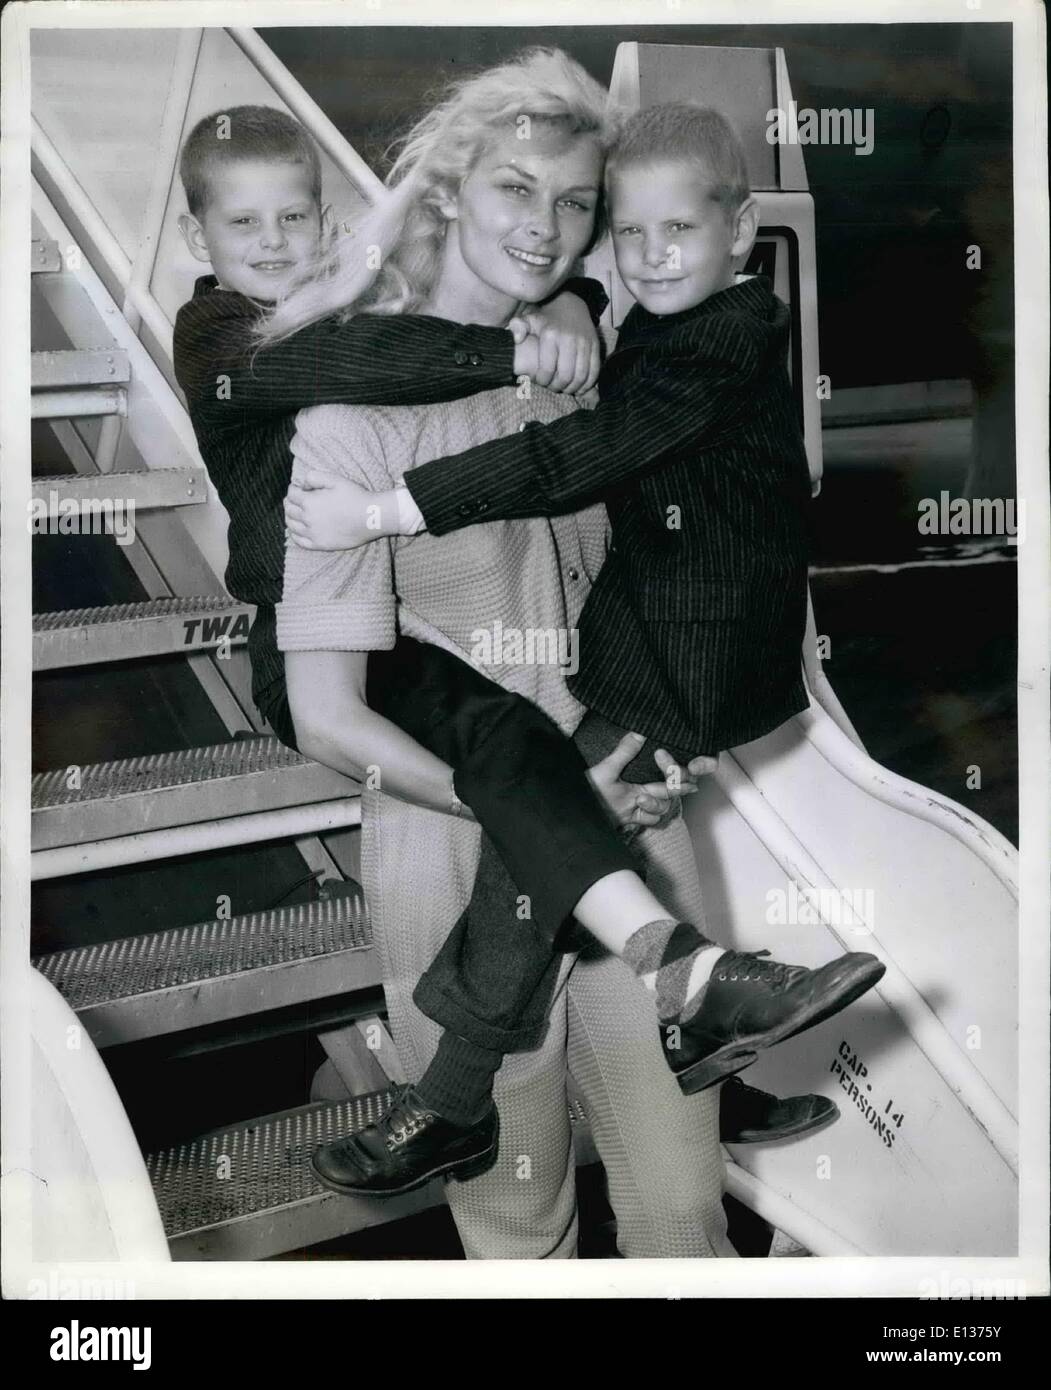 Feb. 29, 2012 - Irish McCulla, TV's Sheena, Carries her sons, Kim, 9, Left, And Sean, 5, Jungle-style prior to boarding a TWA Jetliner To their home in Los Angeles. They arrived in Town earlier in the day from a month long vacation in Europe. Stock Photo